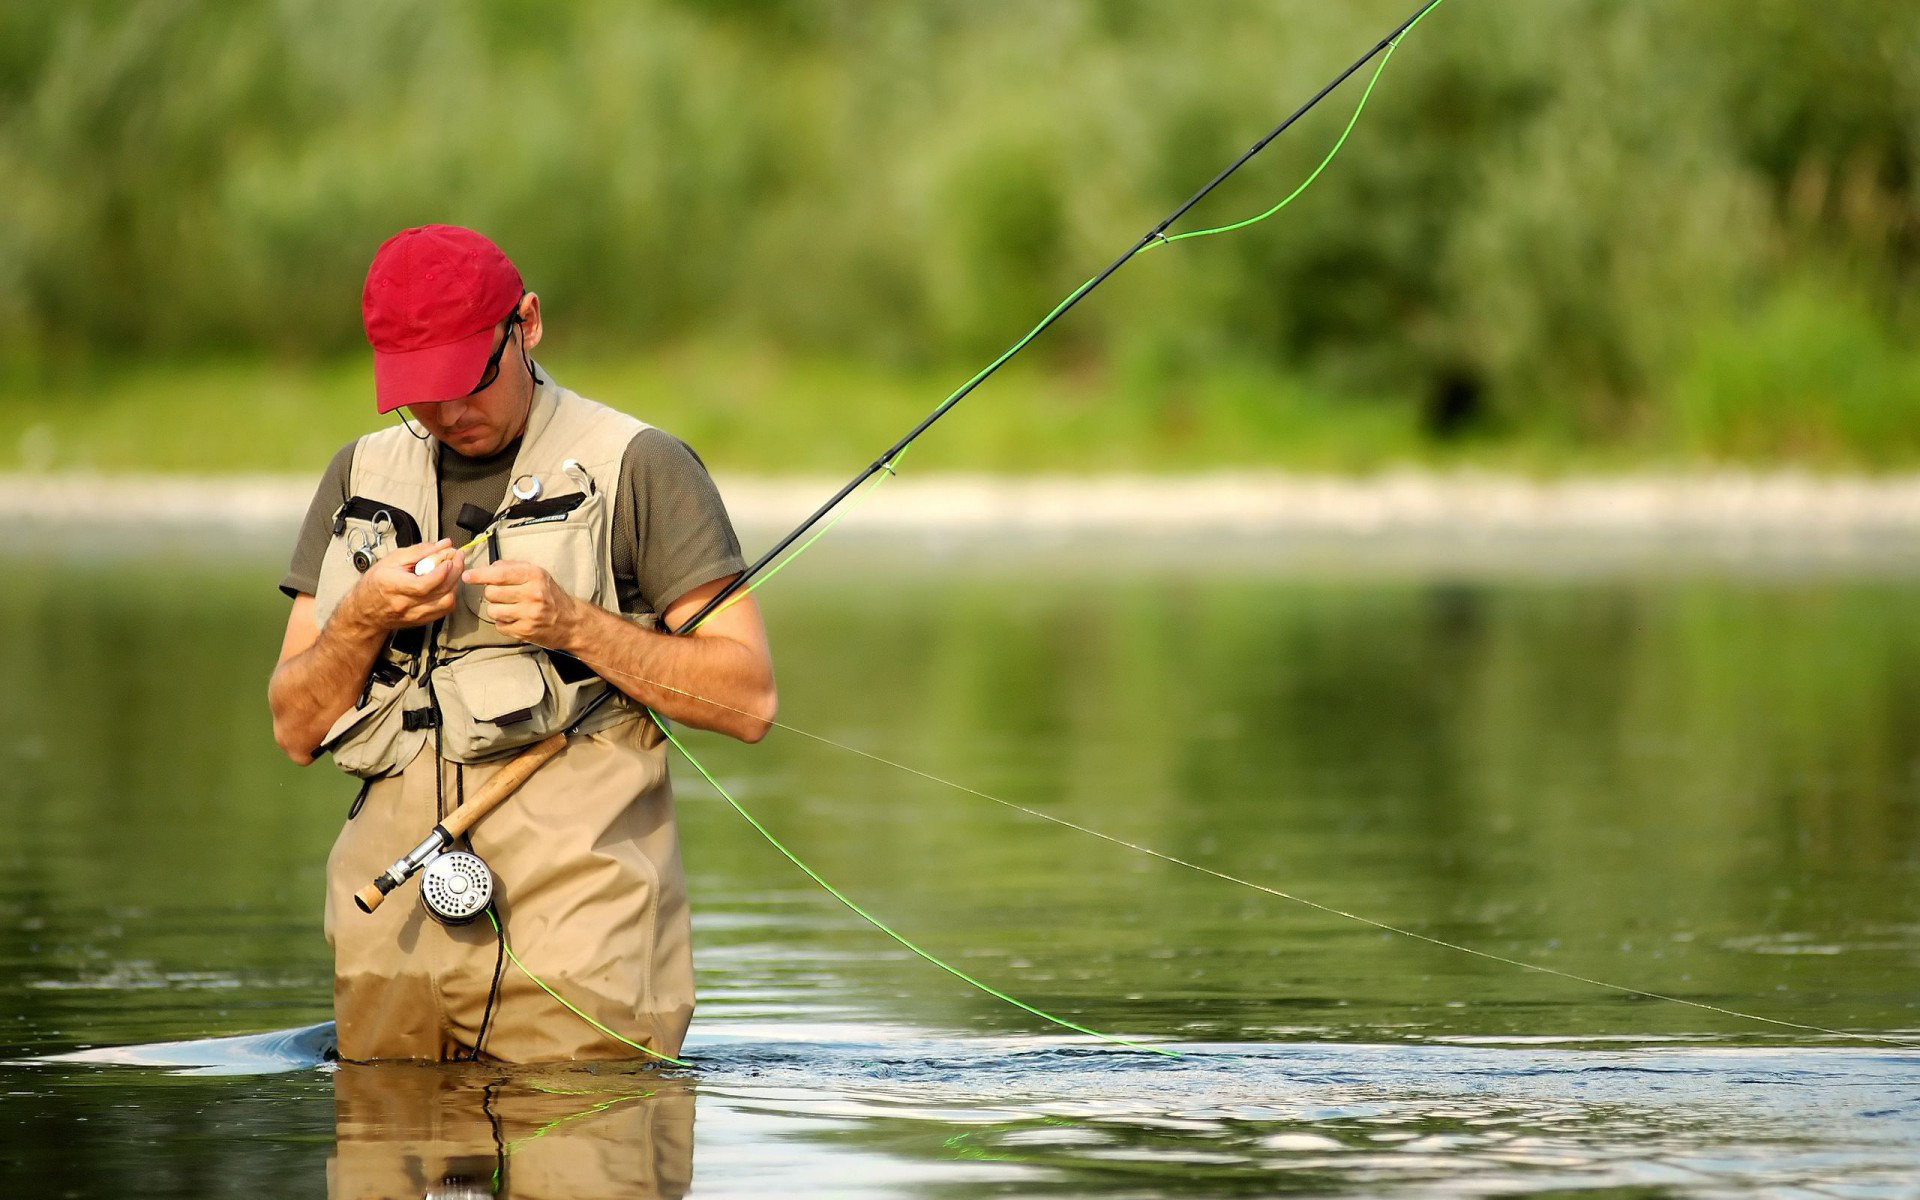 1920x1200 Collection of Fly Fishing Desktop Backgrounds on Spyder Wallpapers  1280Ã1024 Fishing Wallpapers (46